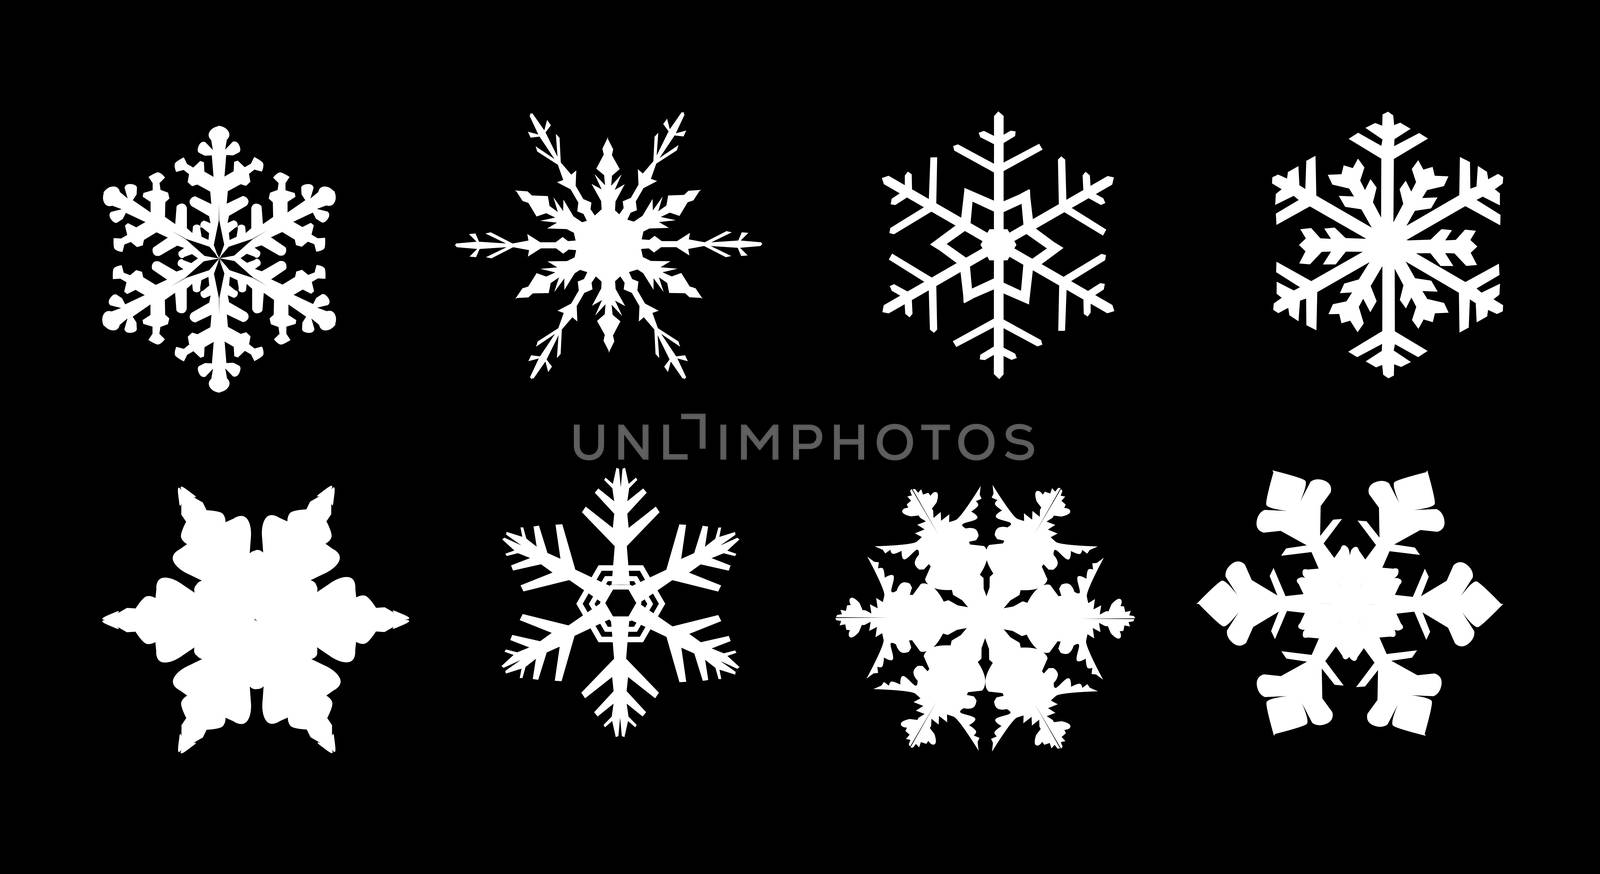 A collection of 8 different snowflakes isolated on a white background